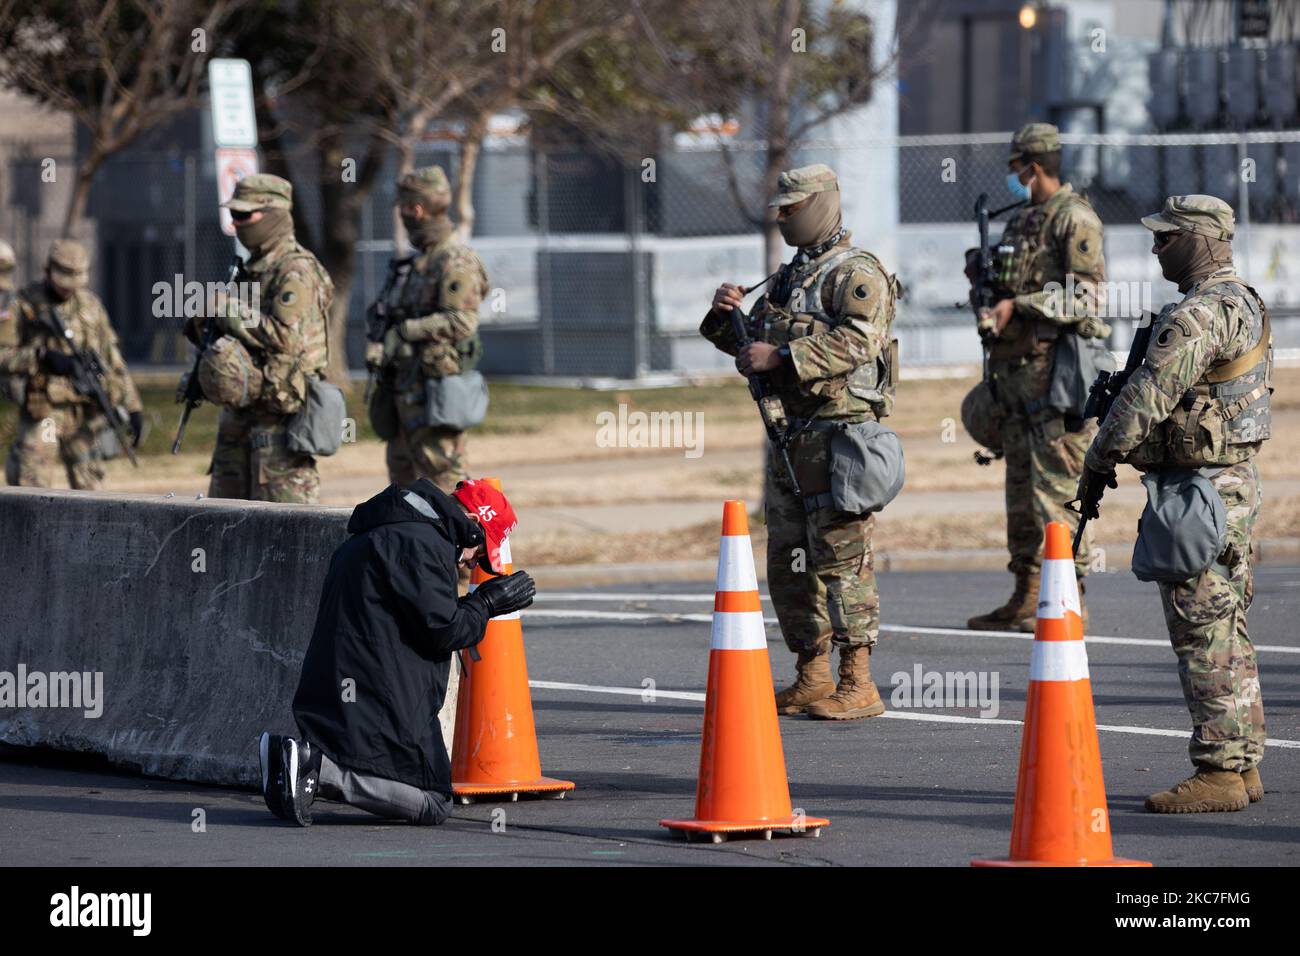 A President Donald Trump supporter wearing a MAGA hat is seen praying in front o Members of The National Guard outside The US Congress. Washington, D.C. January 14, 2021. (Photo by Aurora Samperio/NurPhoto) Stock Photo